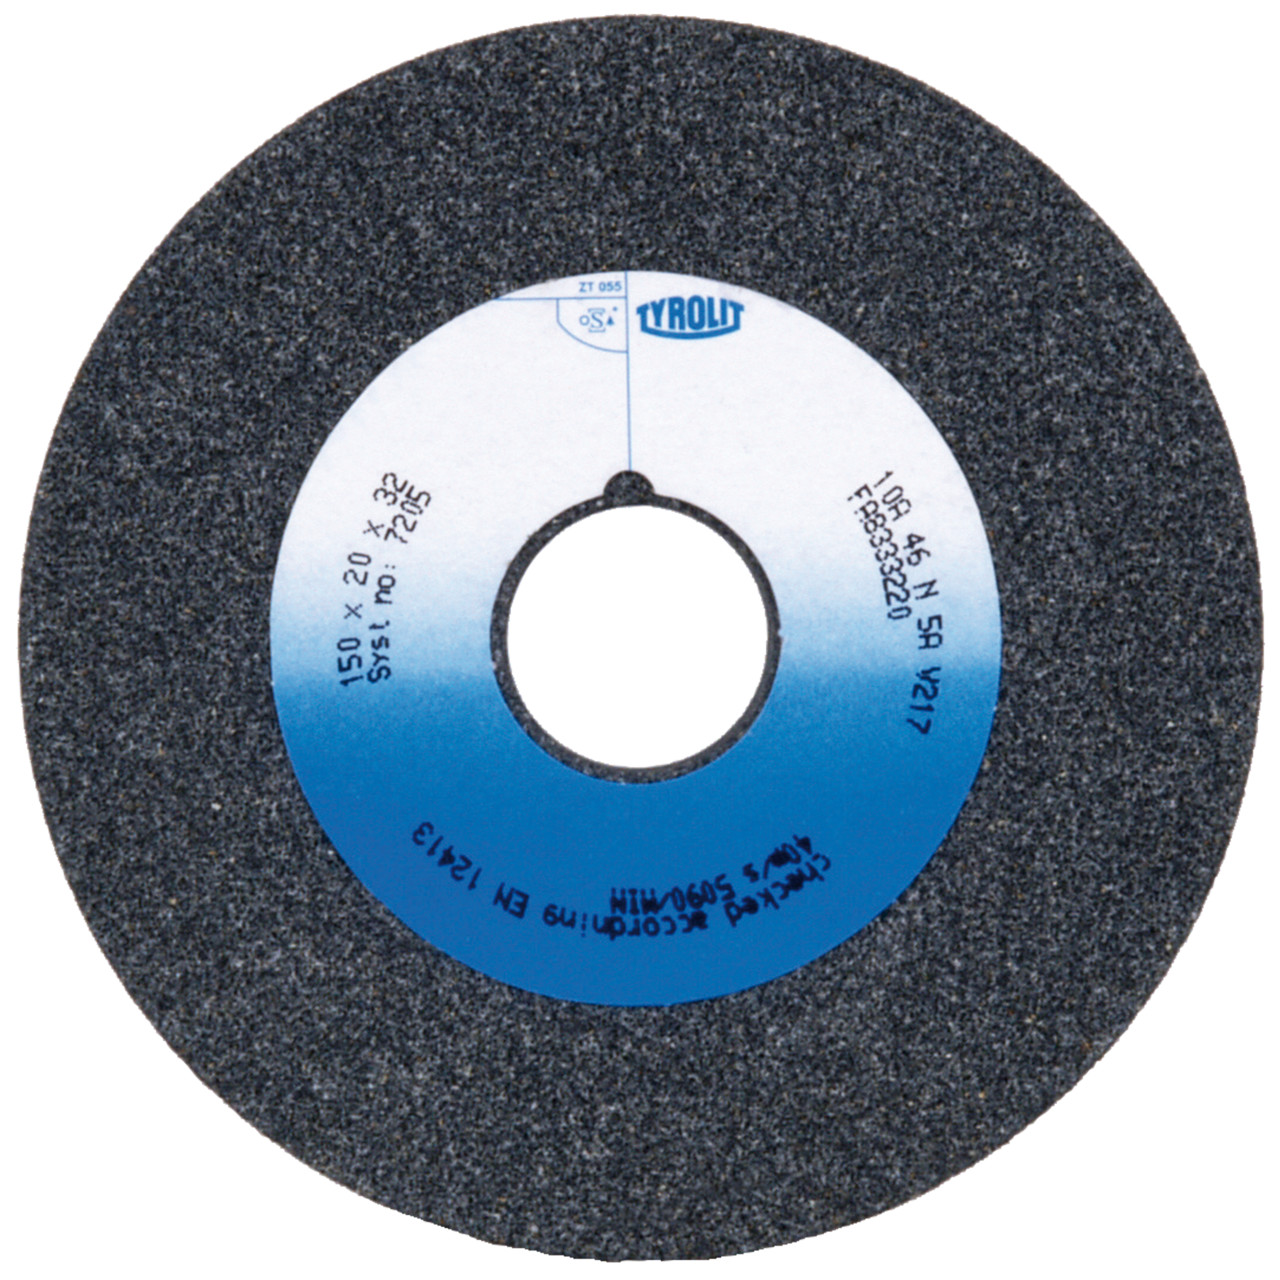 Tyrolit Conventional ceramic grinding discs DxDxH 125x15x32 For unalloyed and low-alloy steels, shape: 1, Art. 34046770